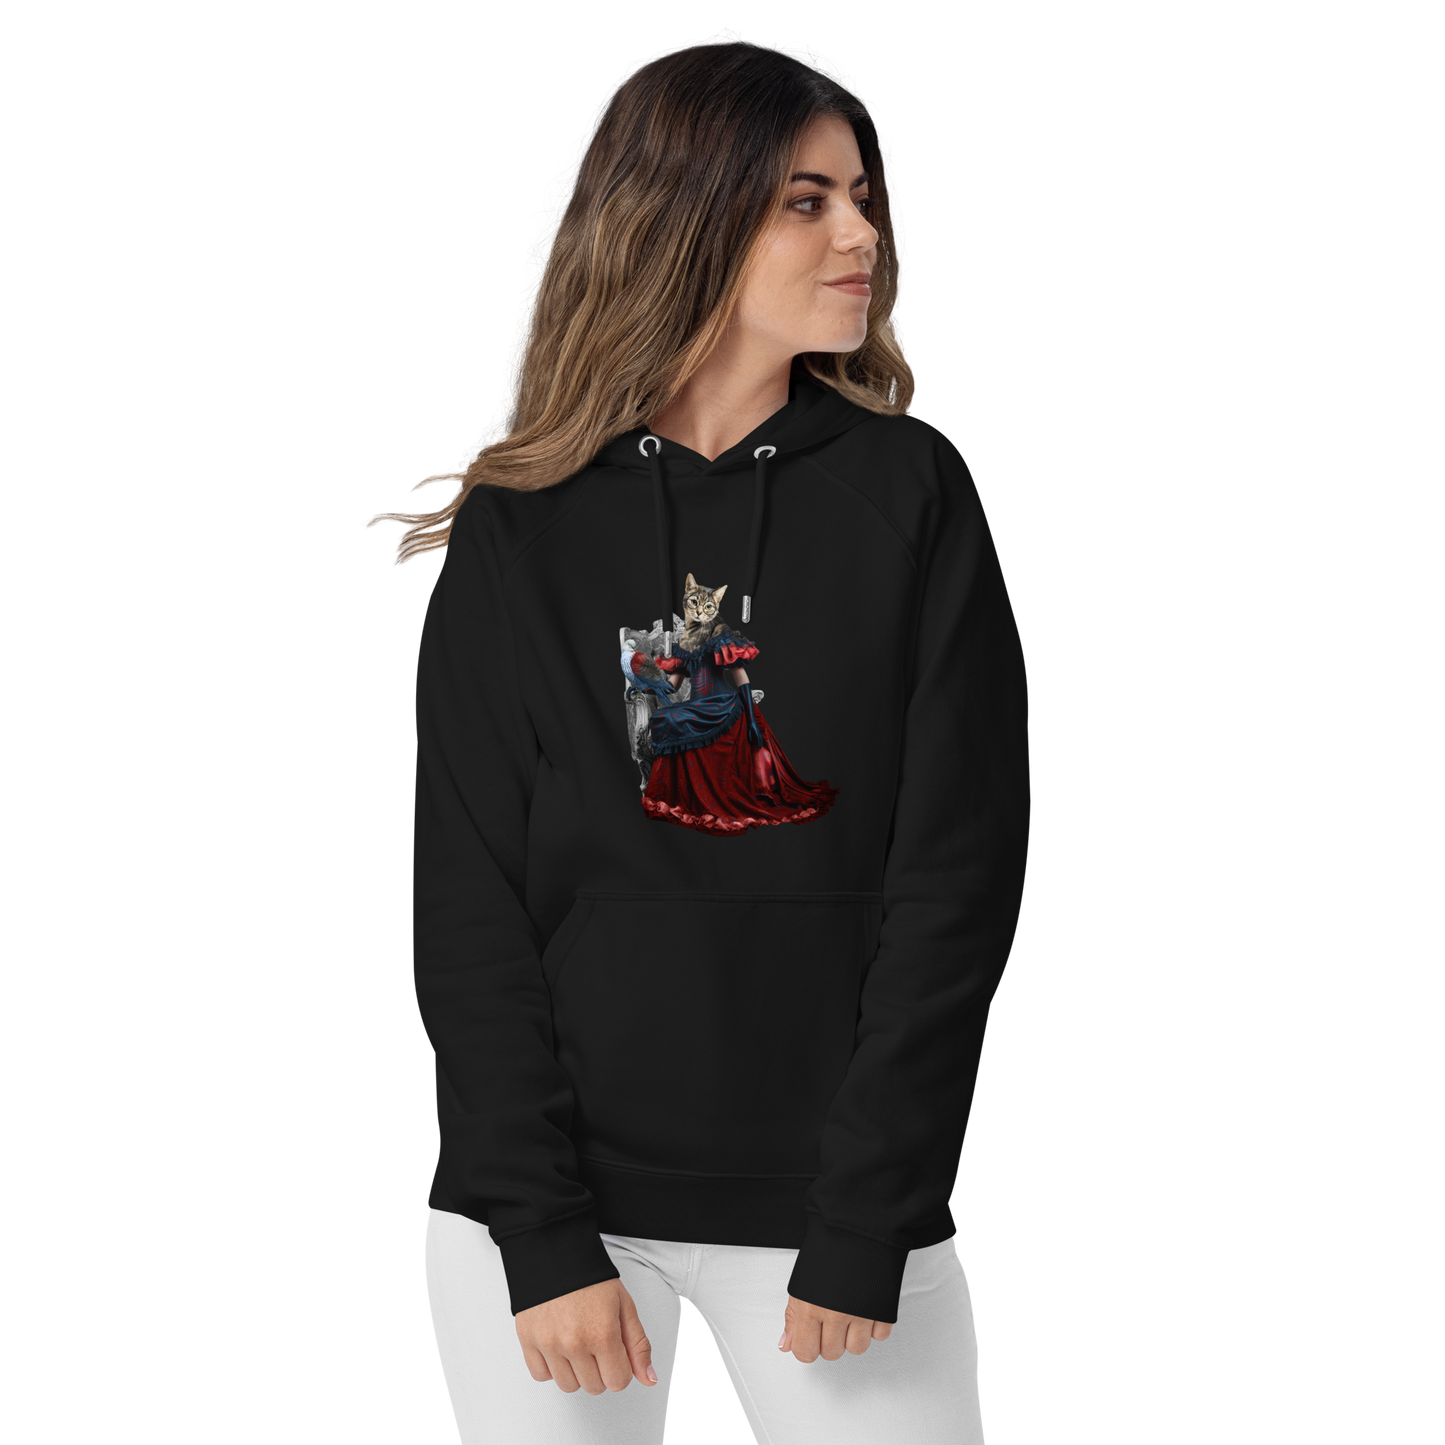 Woman Wearing a Black Anthropomorphic Cat Raglan Hoodie featuring an adorable Anthropomorphic Cat graphic on the chest - Cute Graphic Cat Hoodies - Boozy Fox